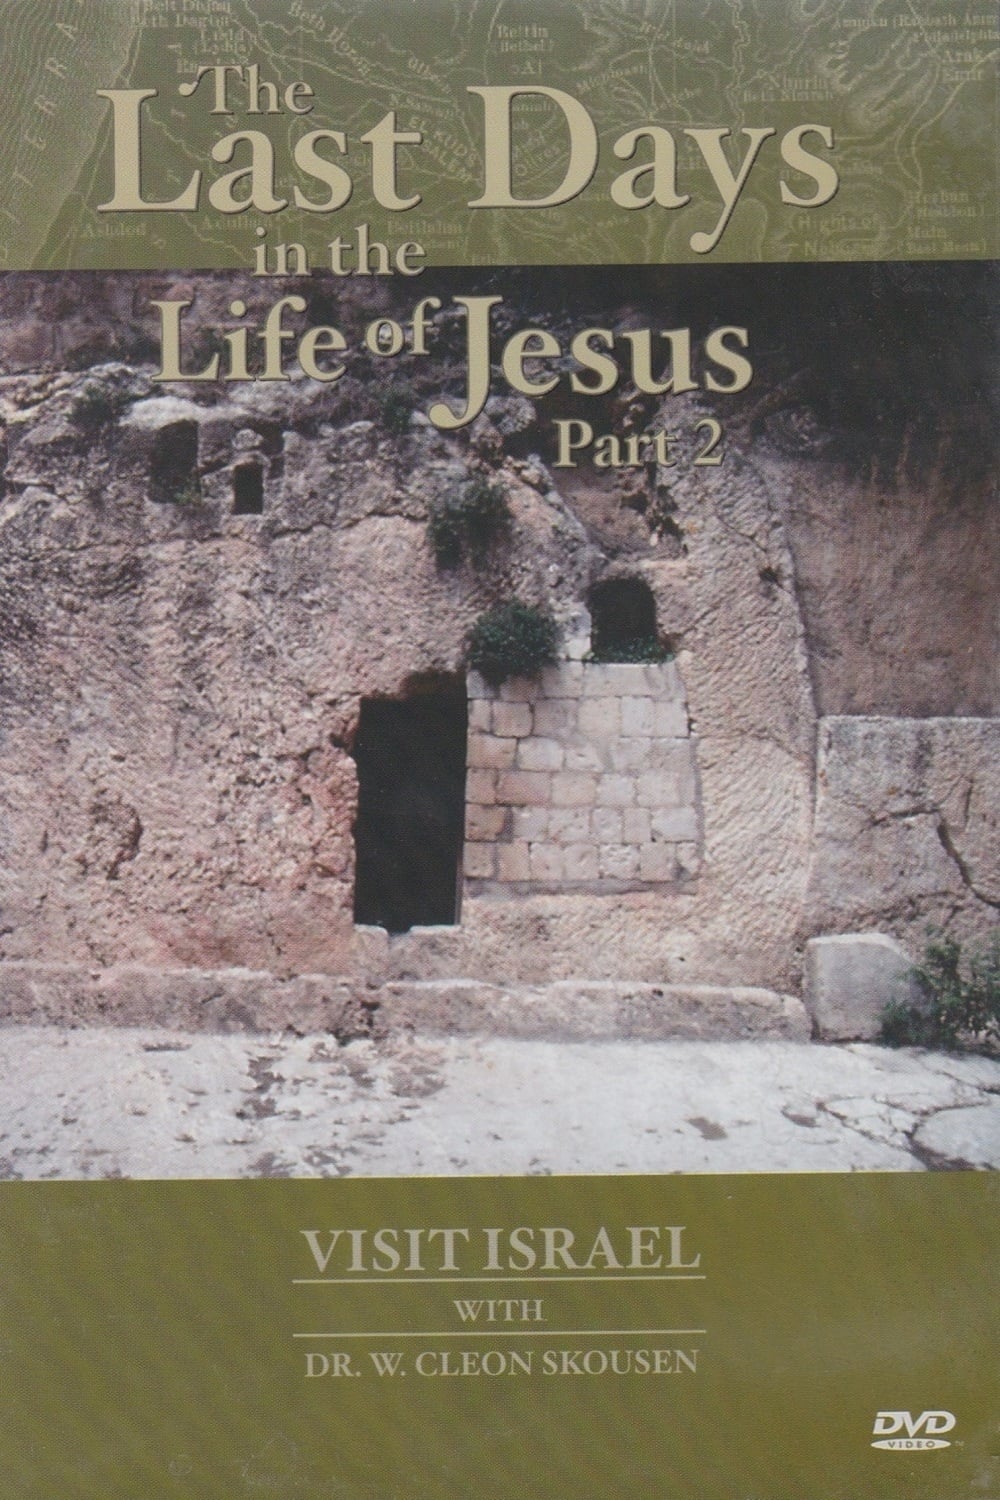 Visit israel with Dr. W. Cleon Skousen - The Last Days in the Life of Jesus (Part 2)